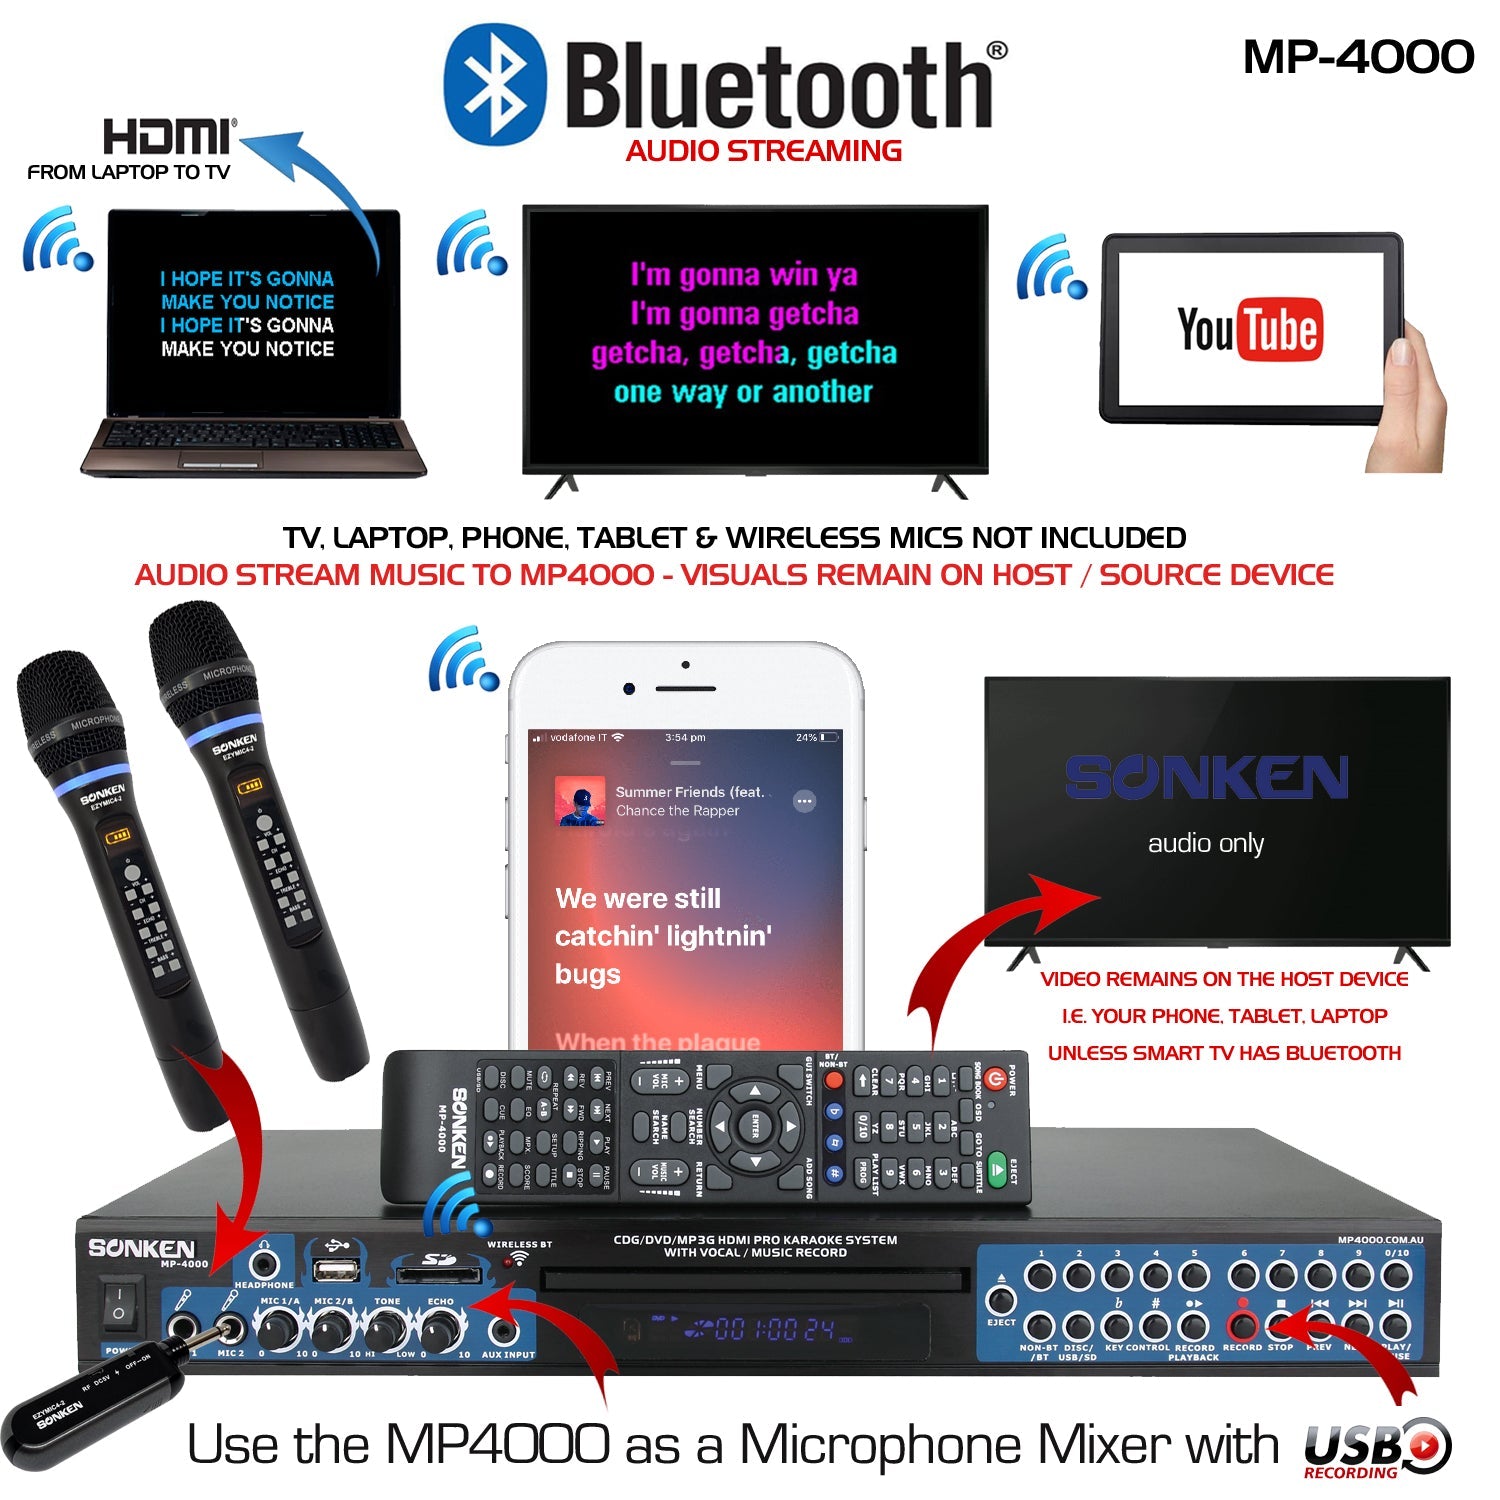 How To Connect Guide - Sonken MP4000 - Karaoke Home Entertainment